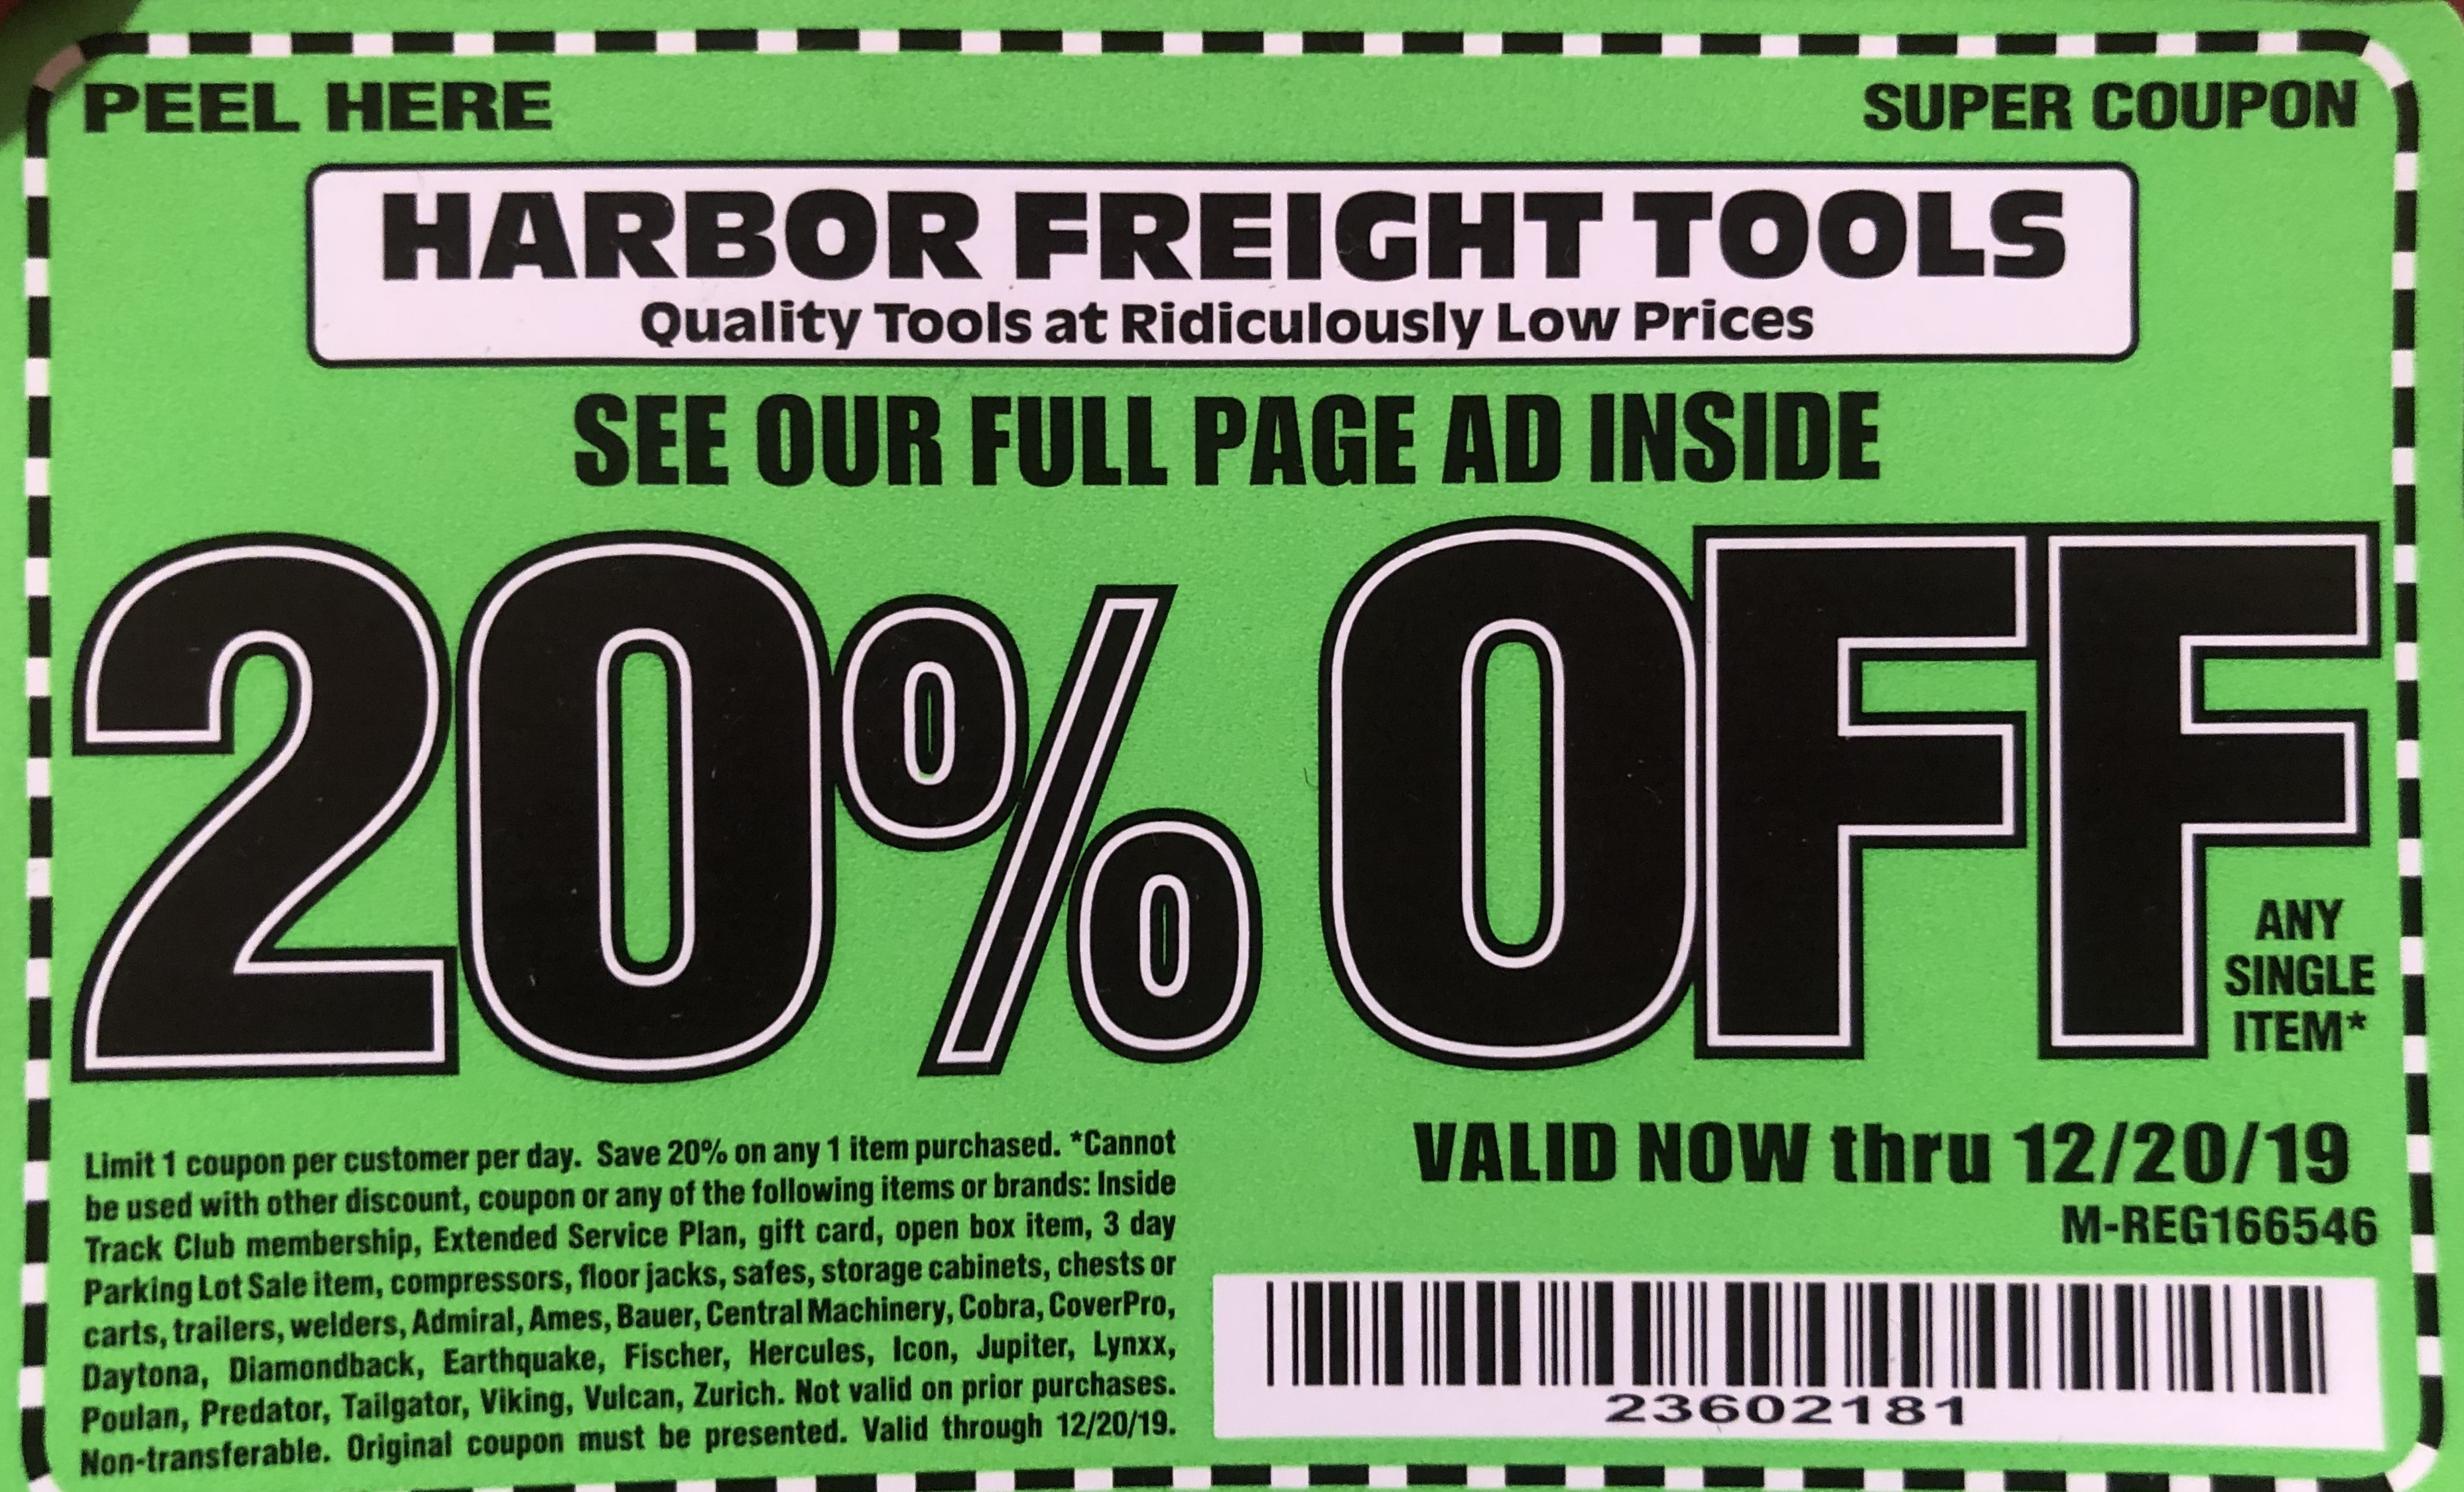 harbor-freight-tools-coupon-database-free-coupons-25-percent-off